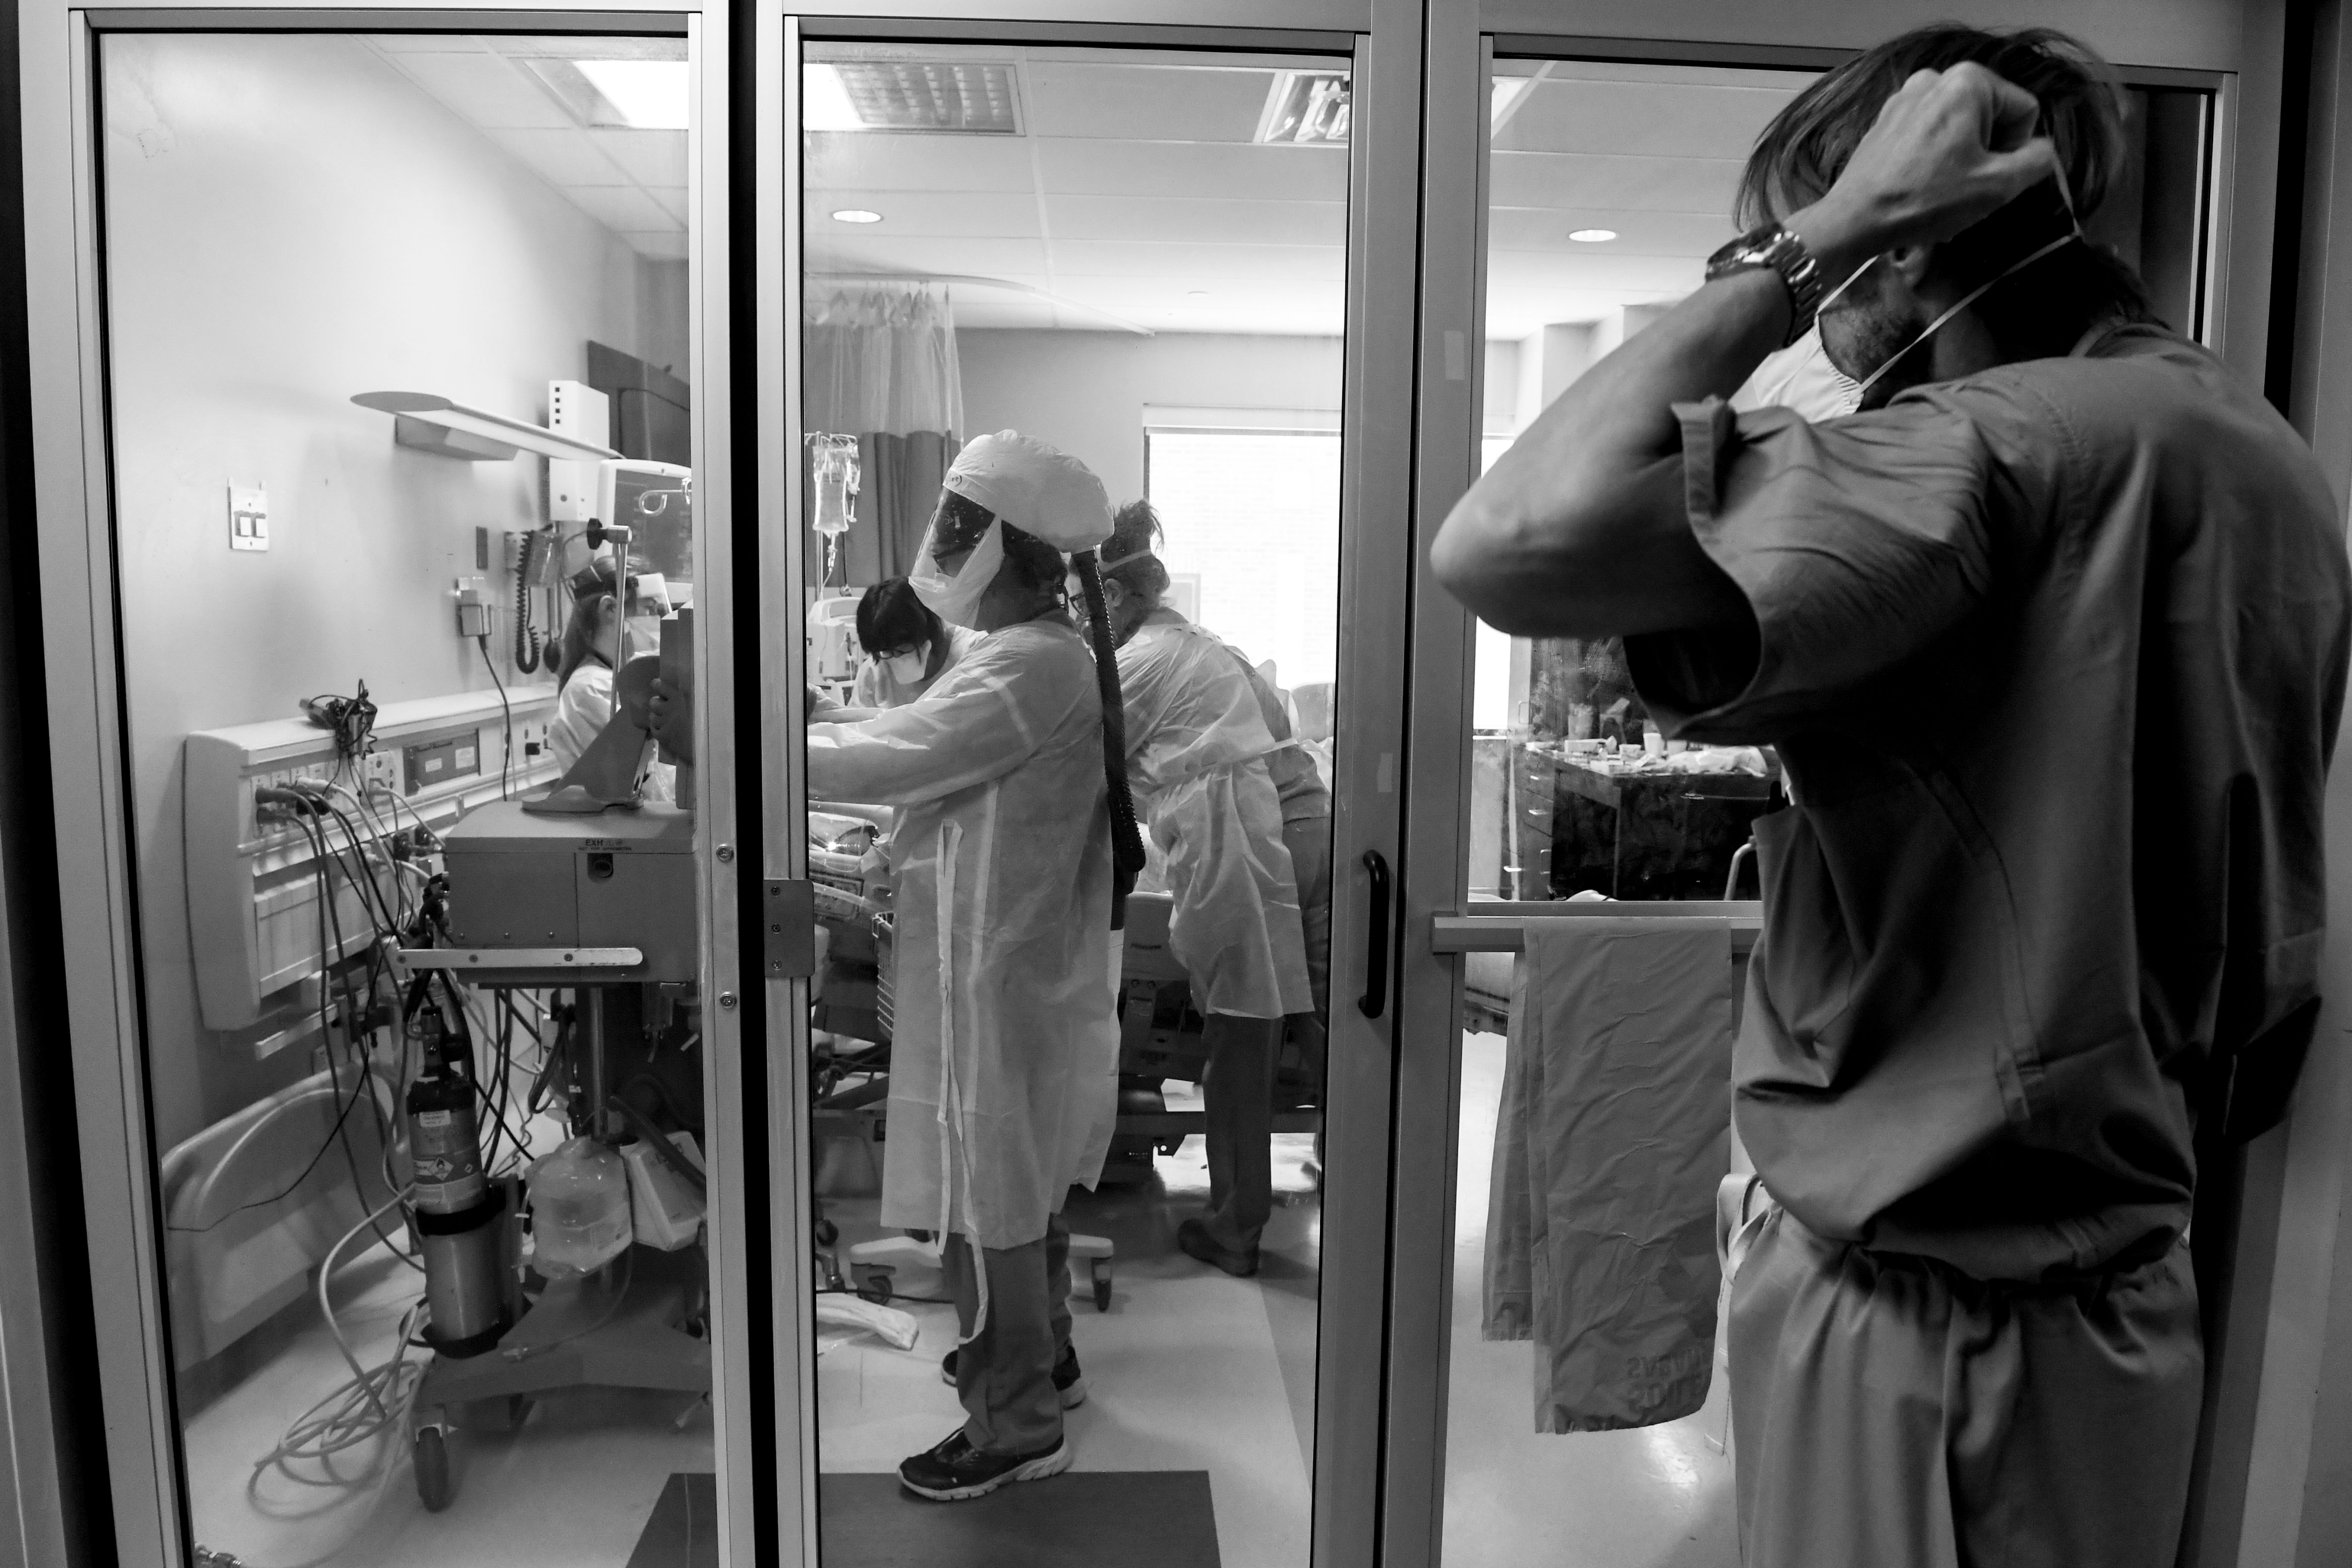 A team of nurses and a respiratory therapist work with a patient in the ICU Covid ward as a doctor masks up at the Medical Center of Aurora on Tuesday, May 27, 2020. (AAron Ontiveroz—MediaNews Group/The Denver Post via Getty Images)